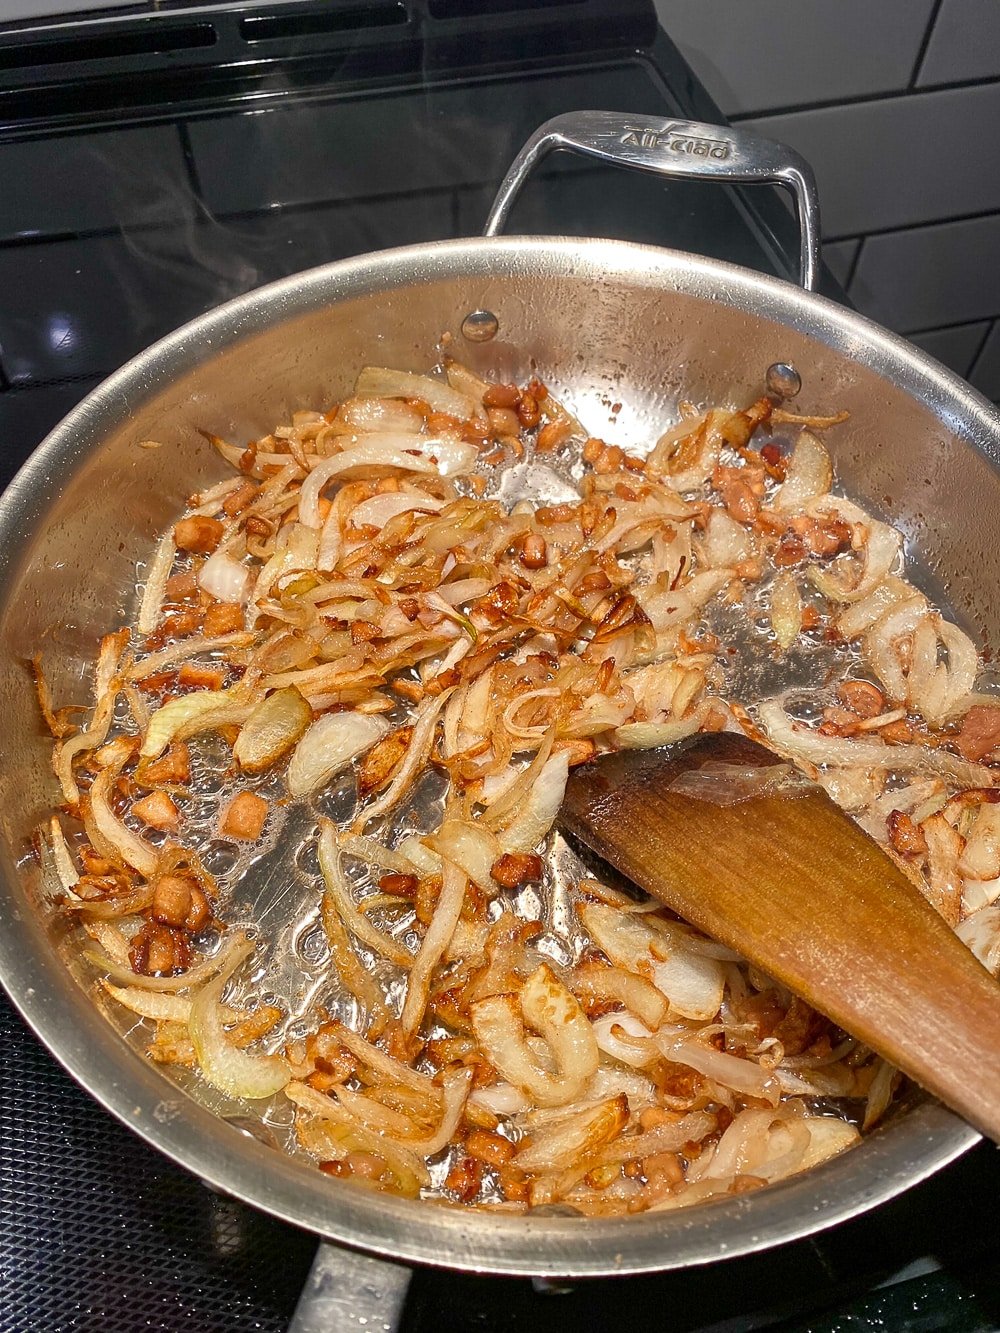 Caramelize the onions so that they are well browned